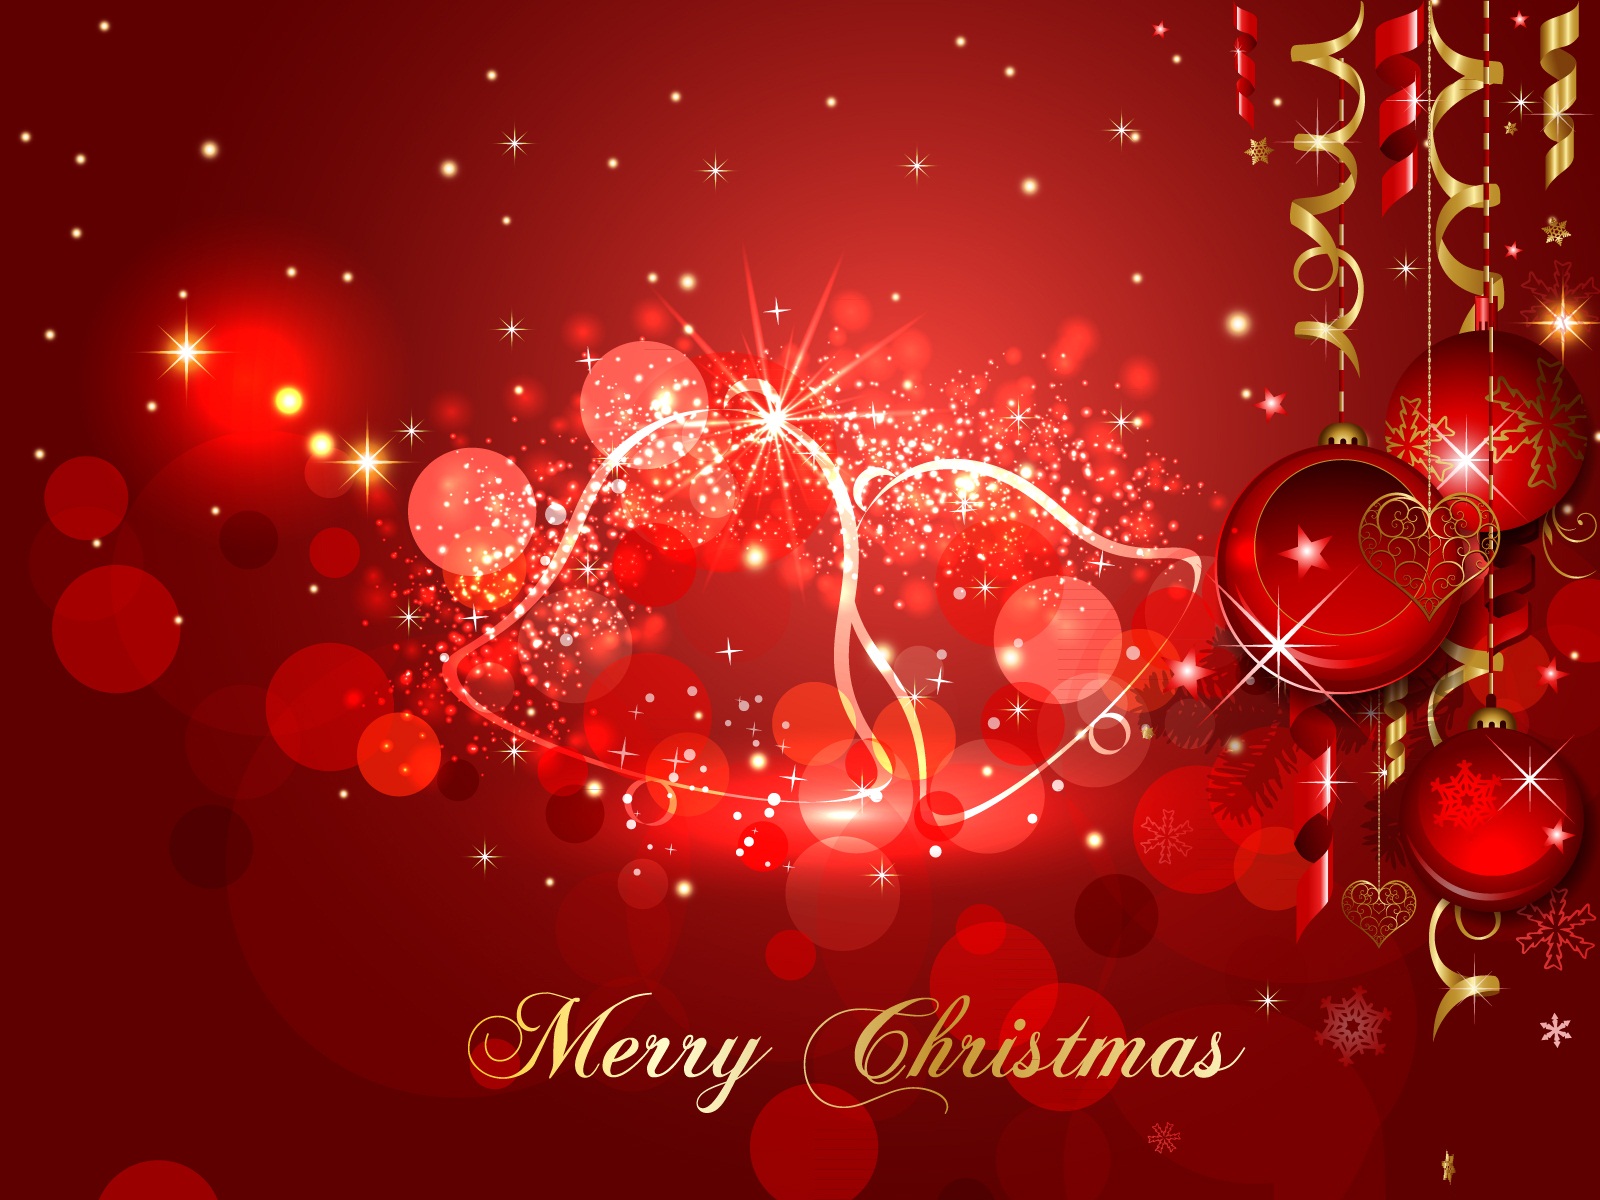 Merry Christmas Wallpaper Image Amp Pictures Becuo